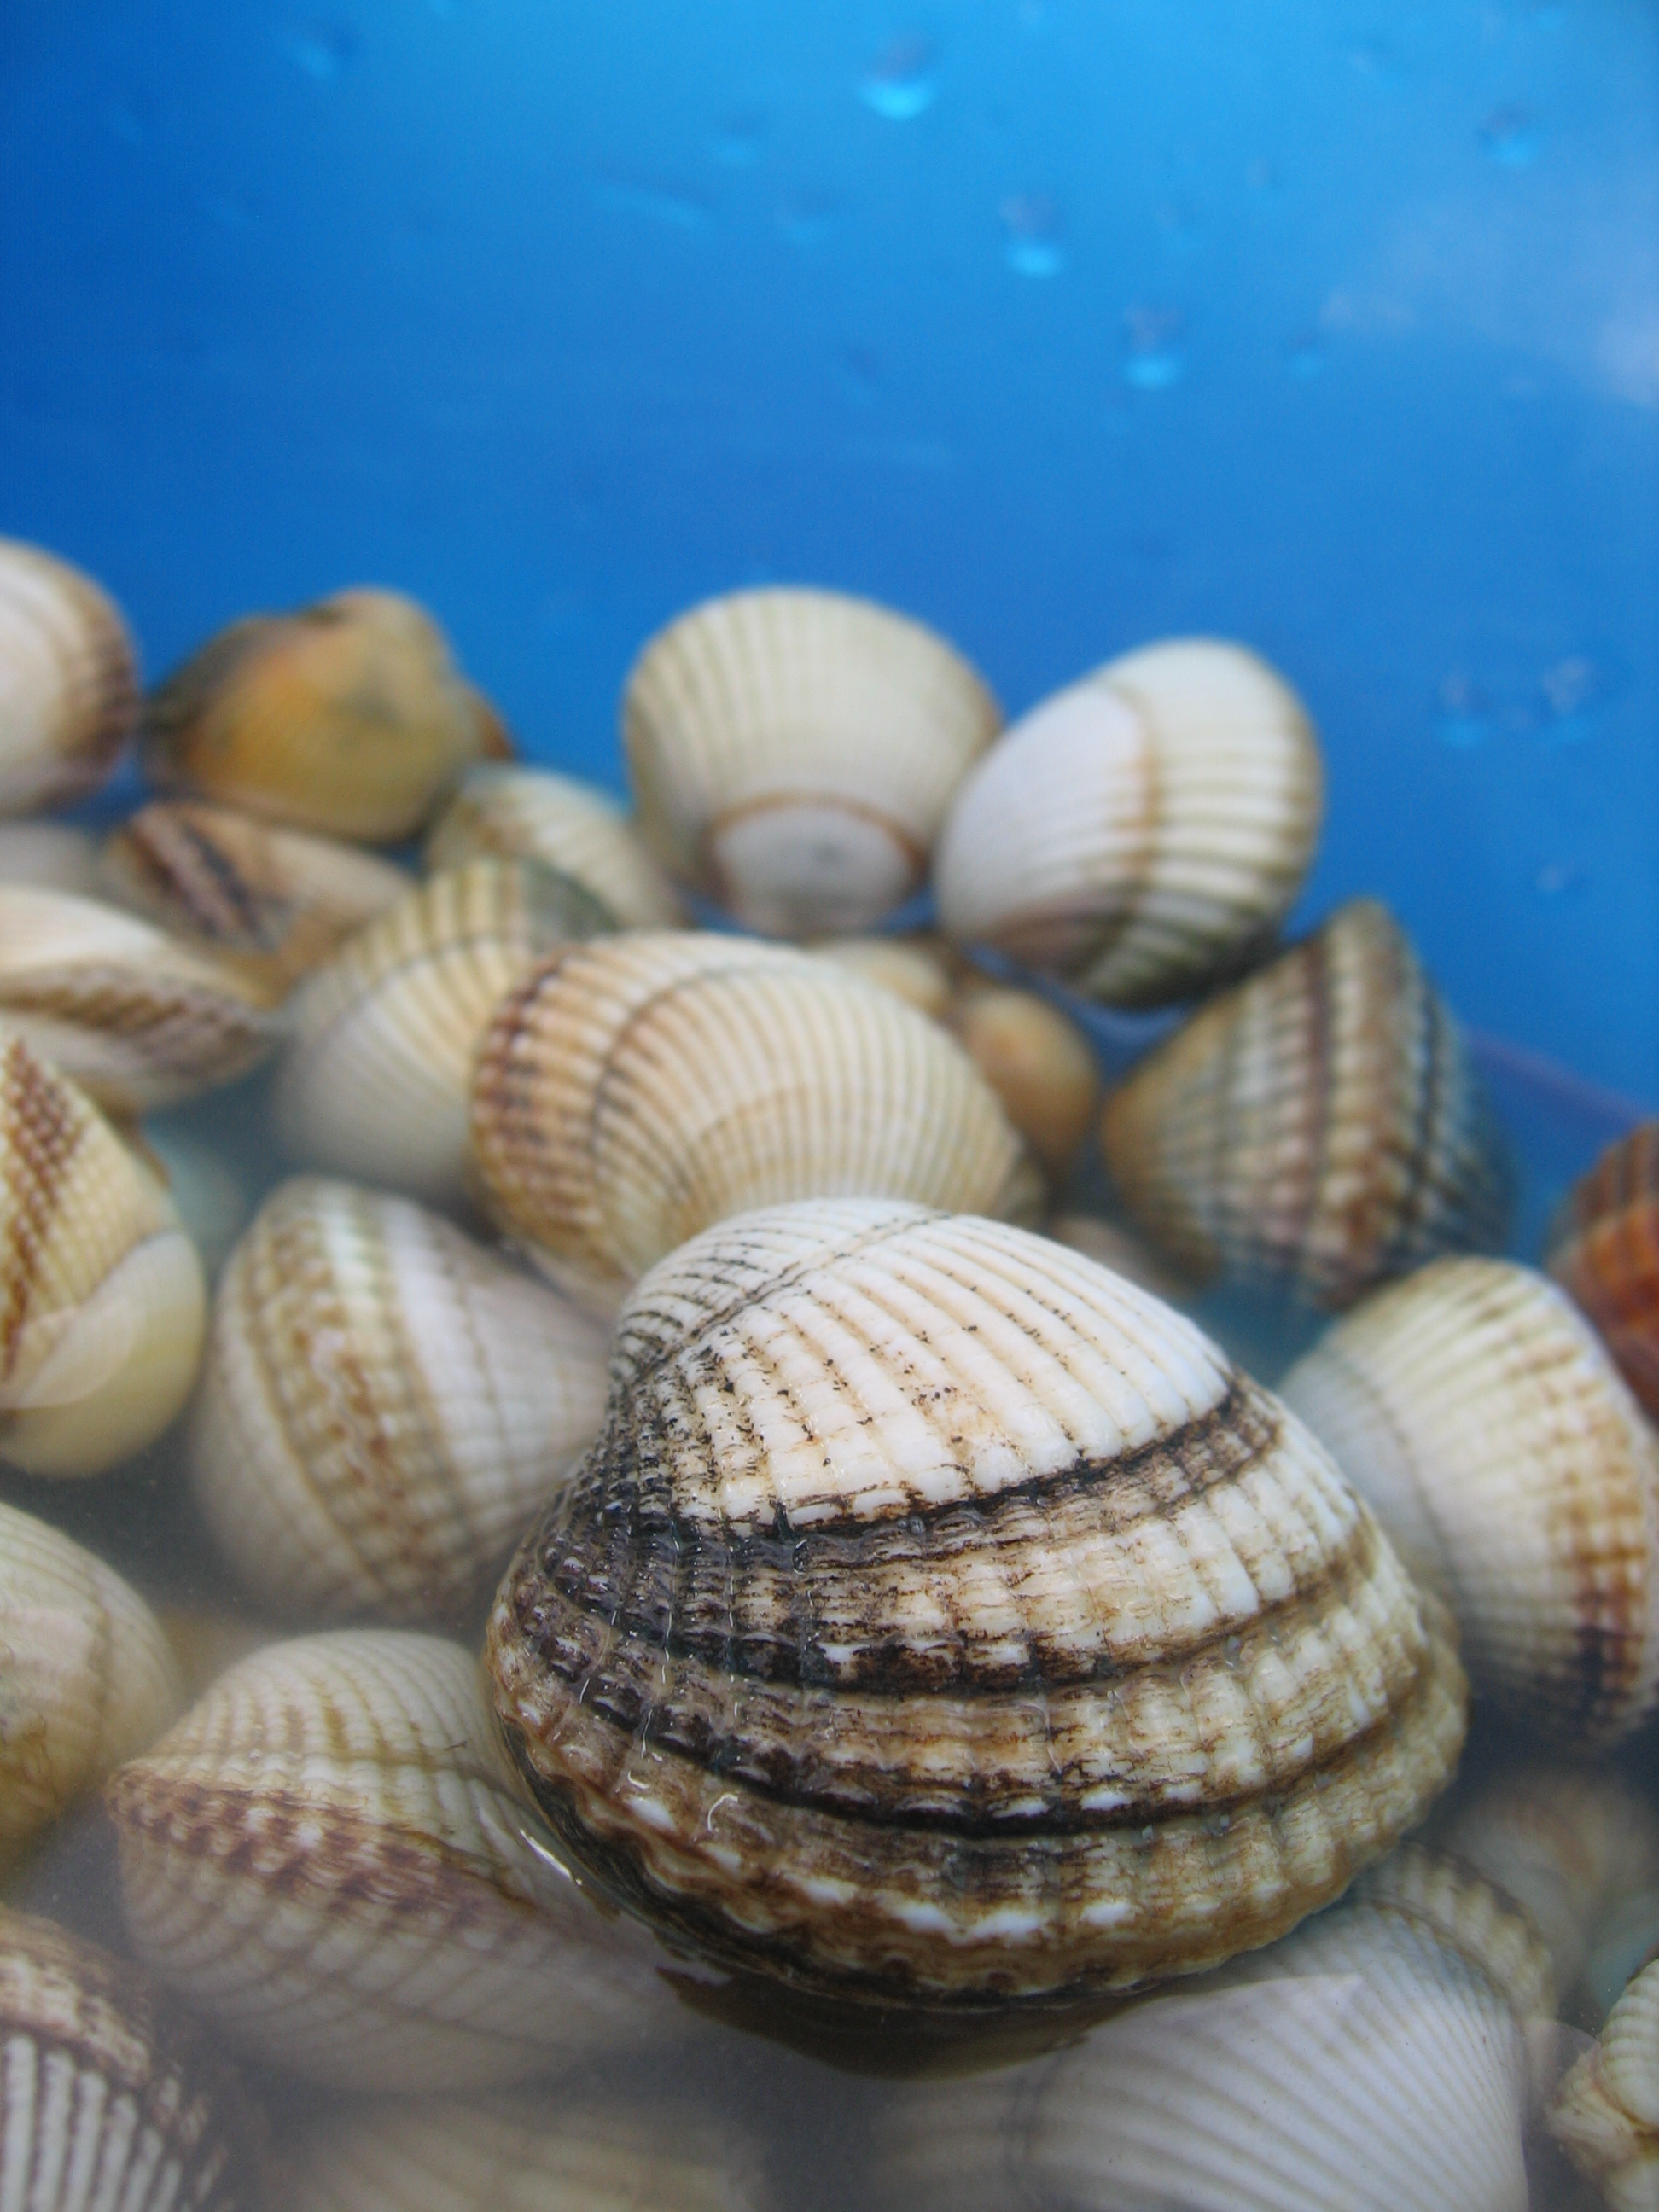 pictures of clams in the ocean